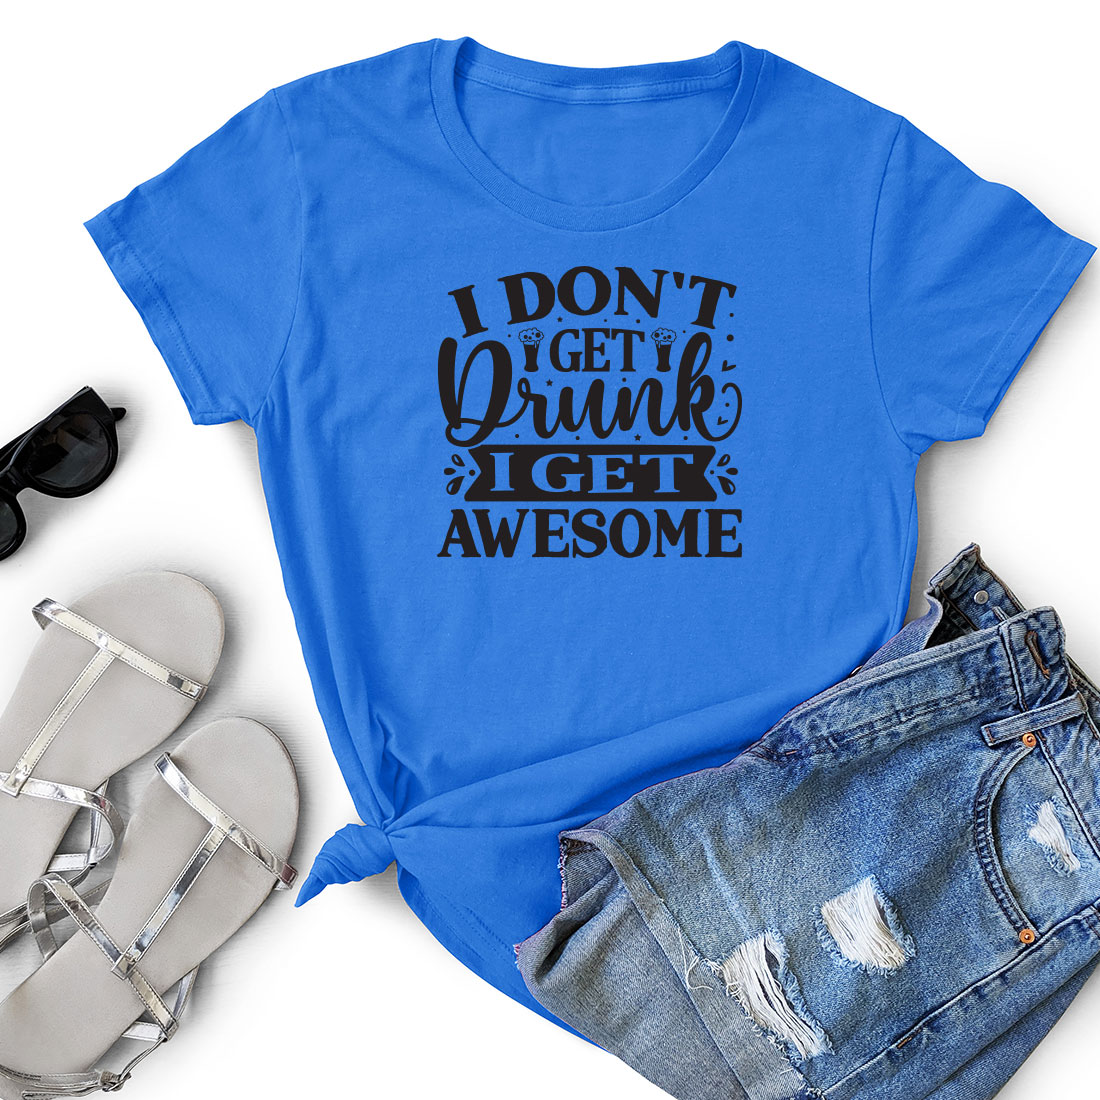 T - shirt that says i don't get drunk.